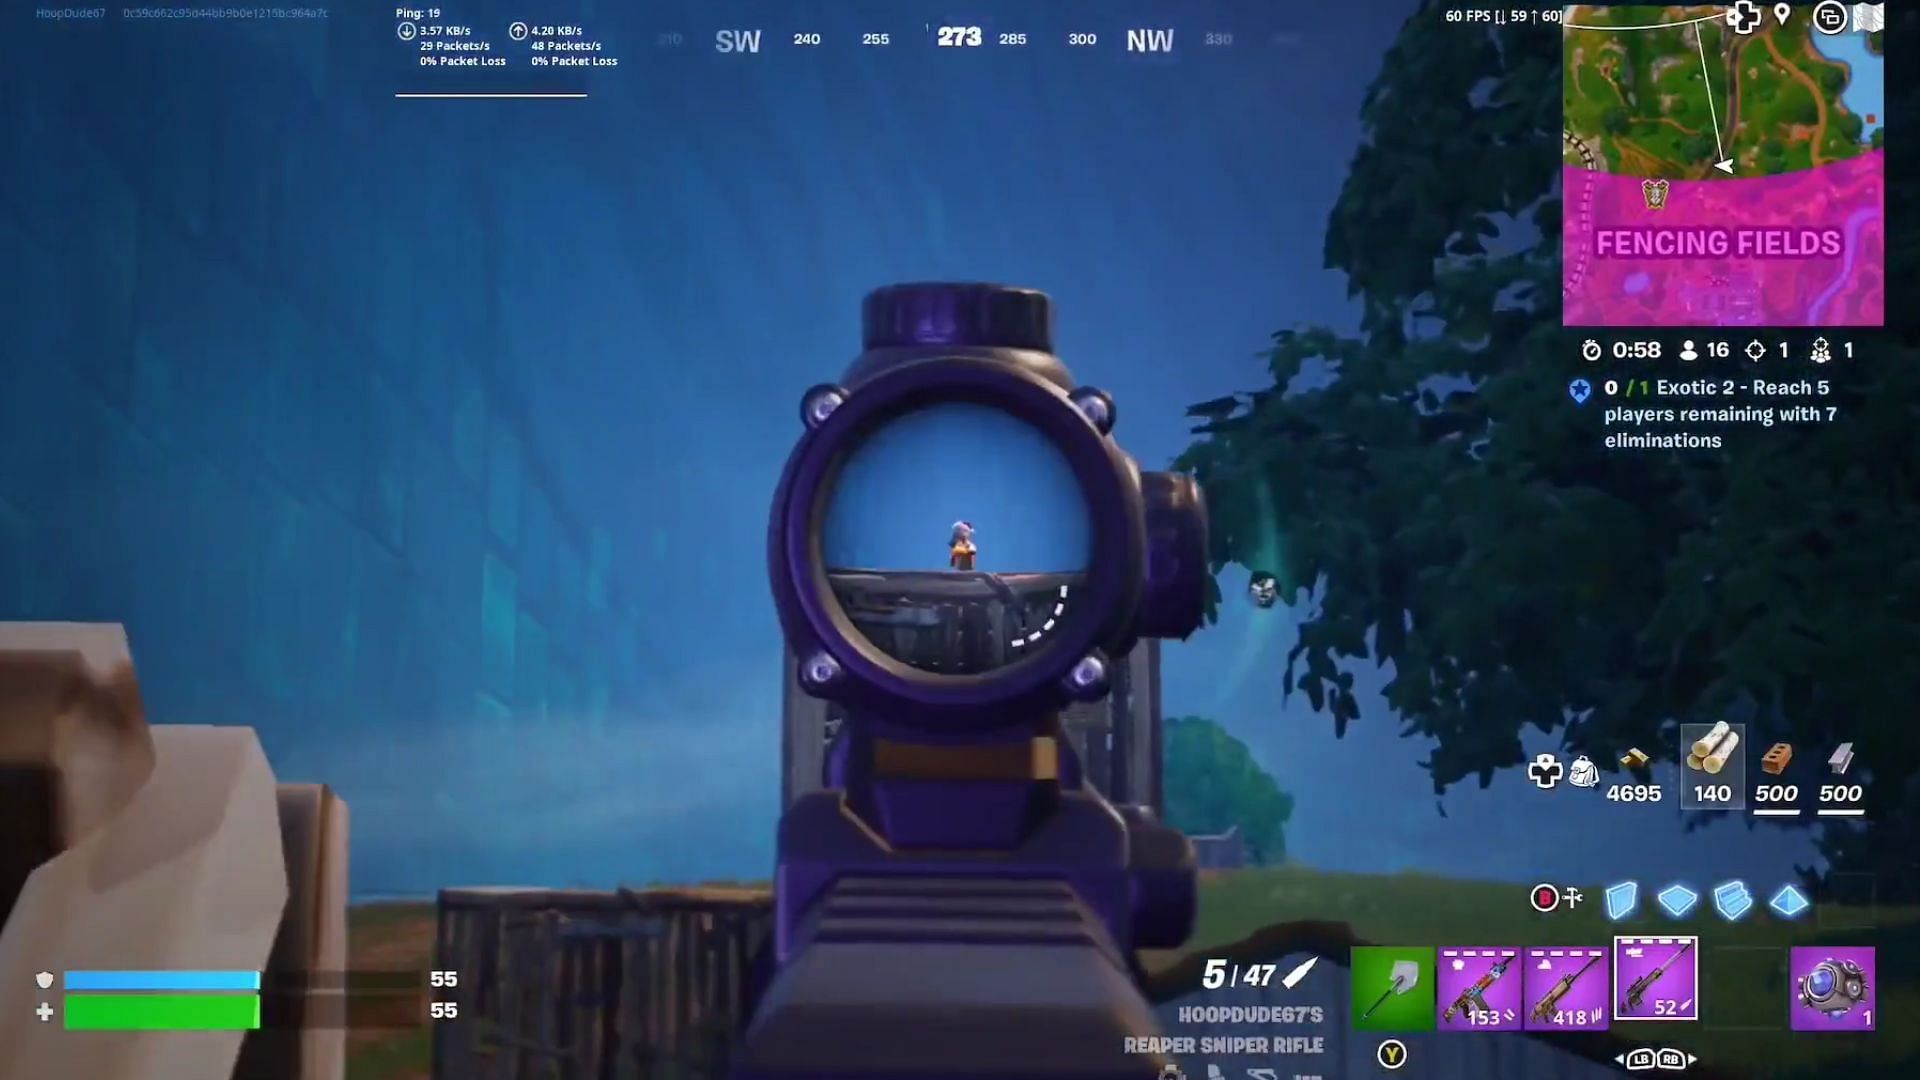 &quot;Snipers make Fortnite unplayable:&quot; Player uploads a montage of themselves getting eliminated